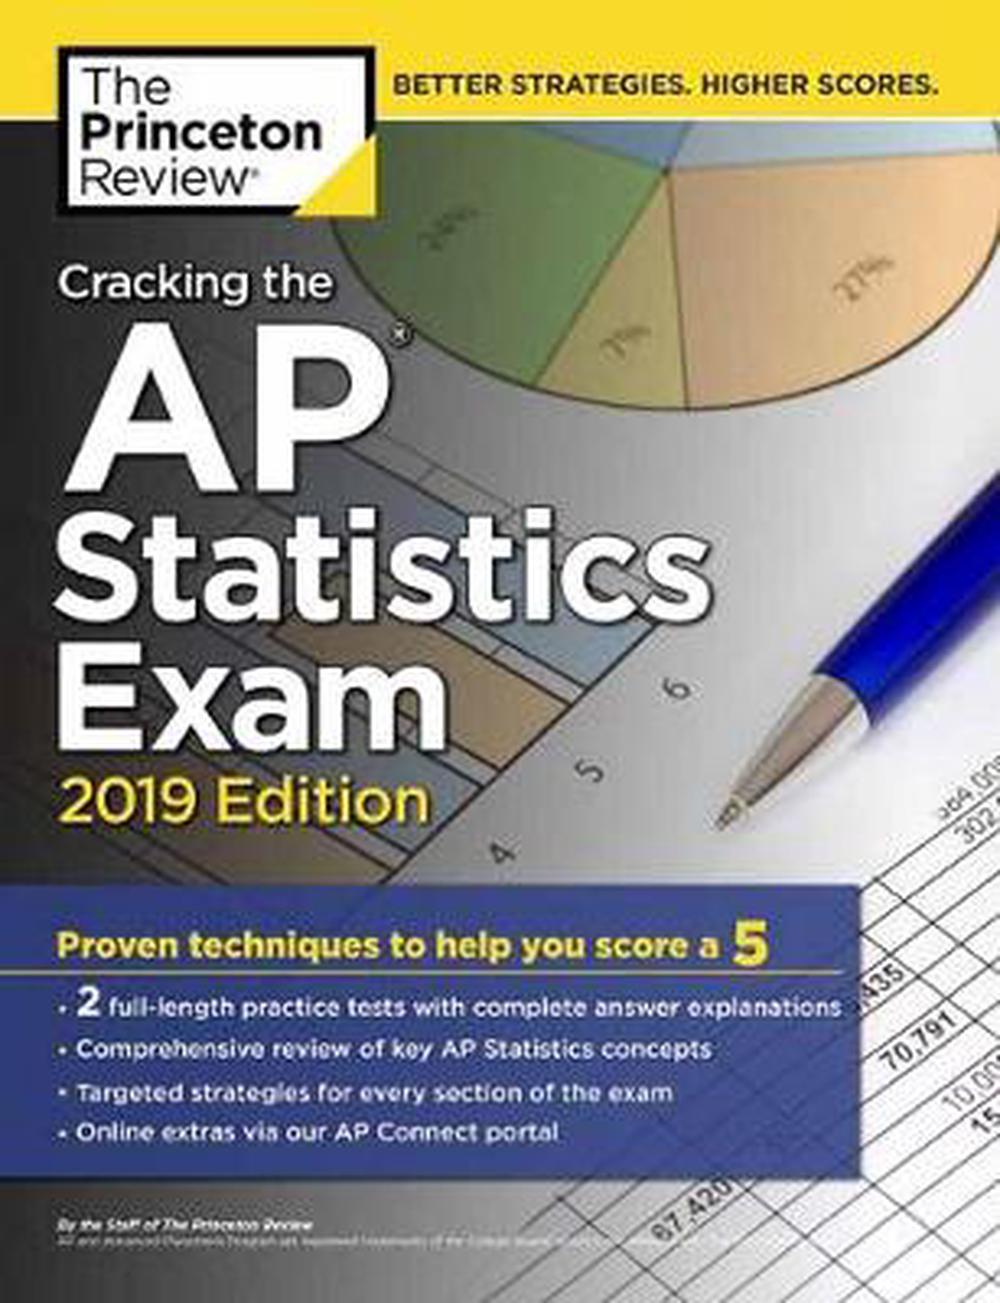 online statbook review